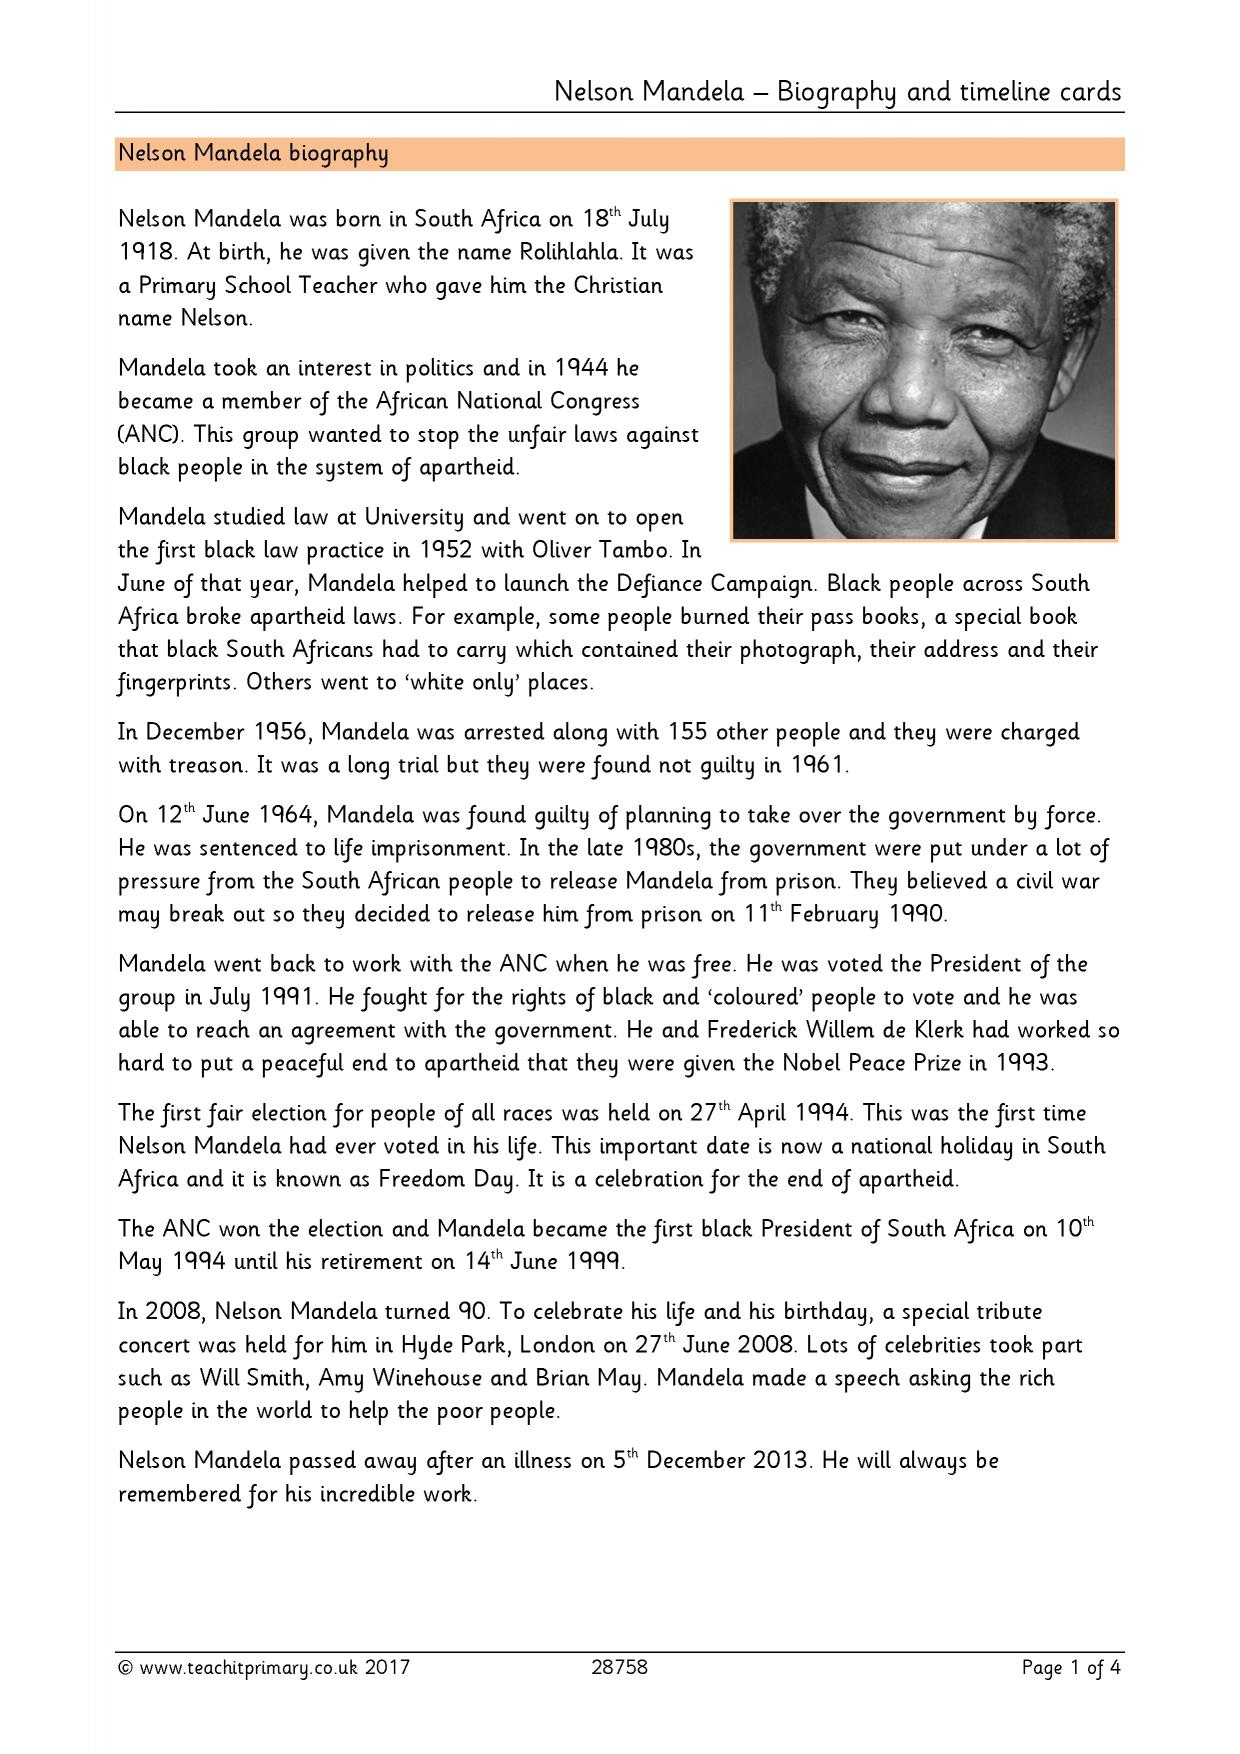 project on biography of nelson mandela